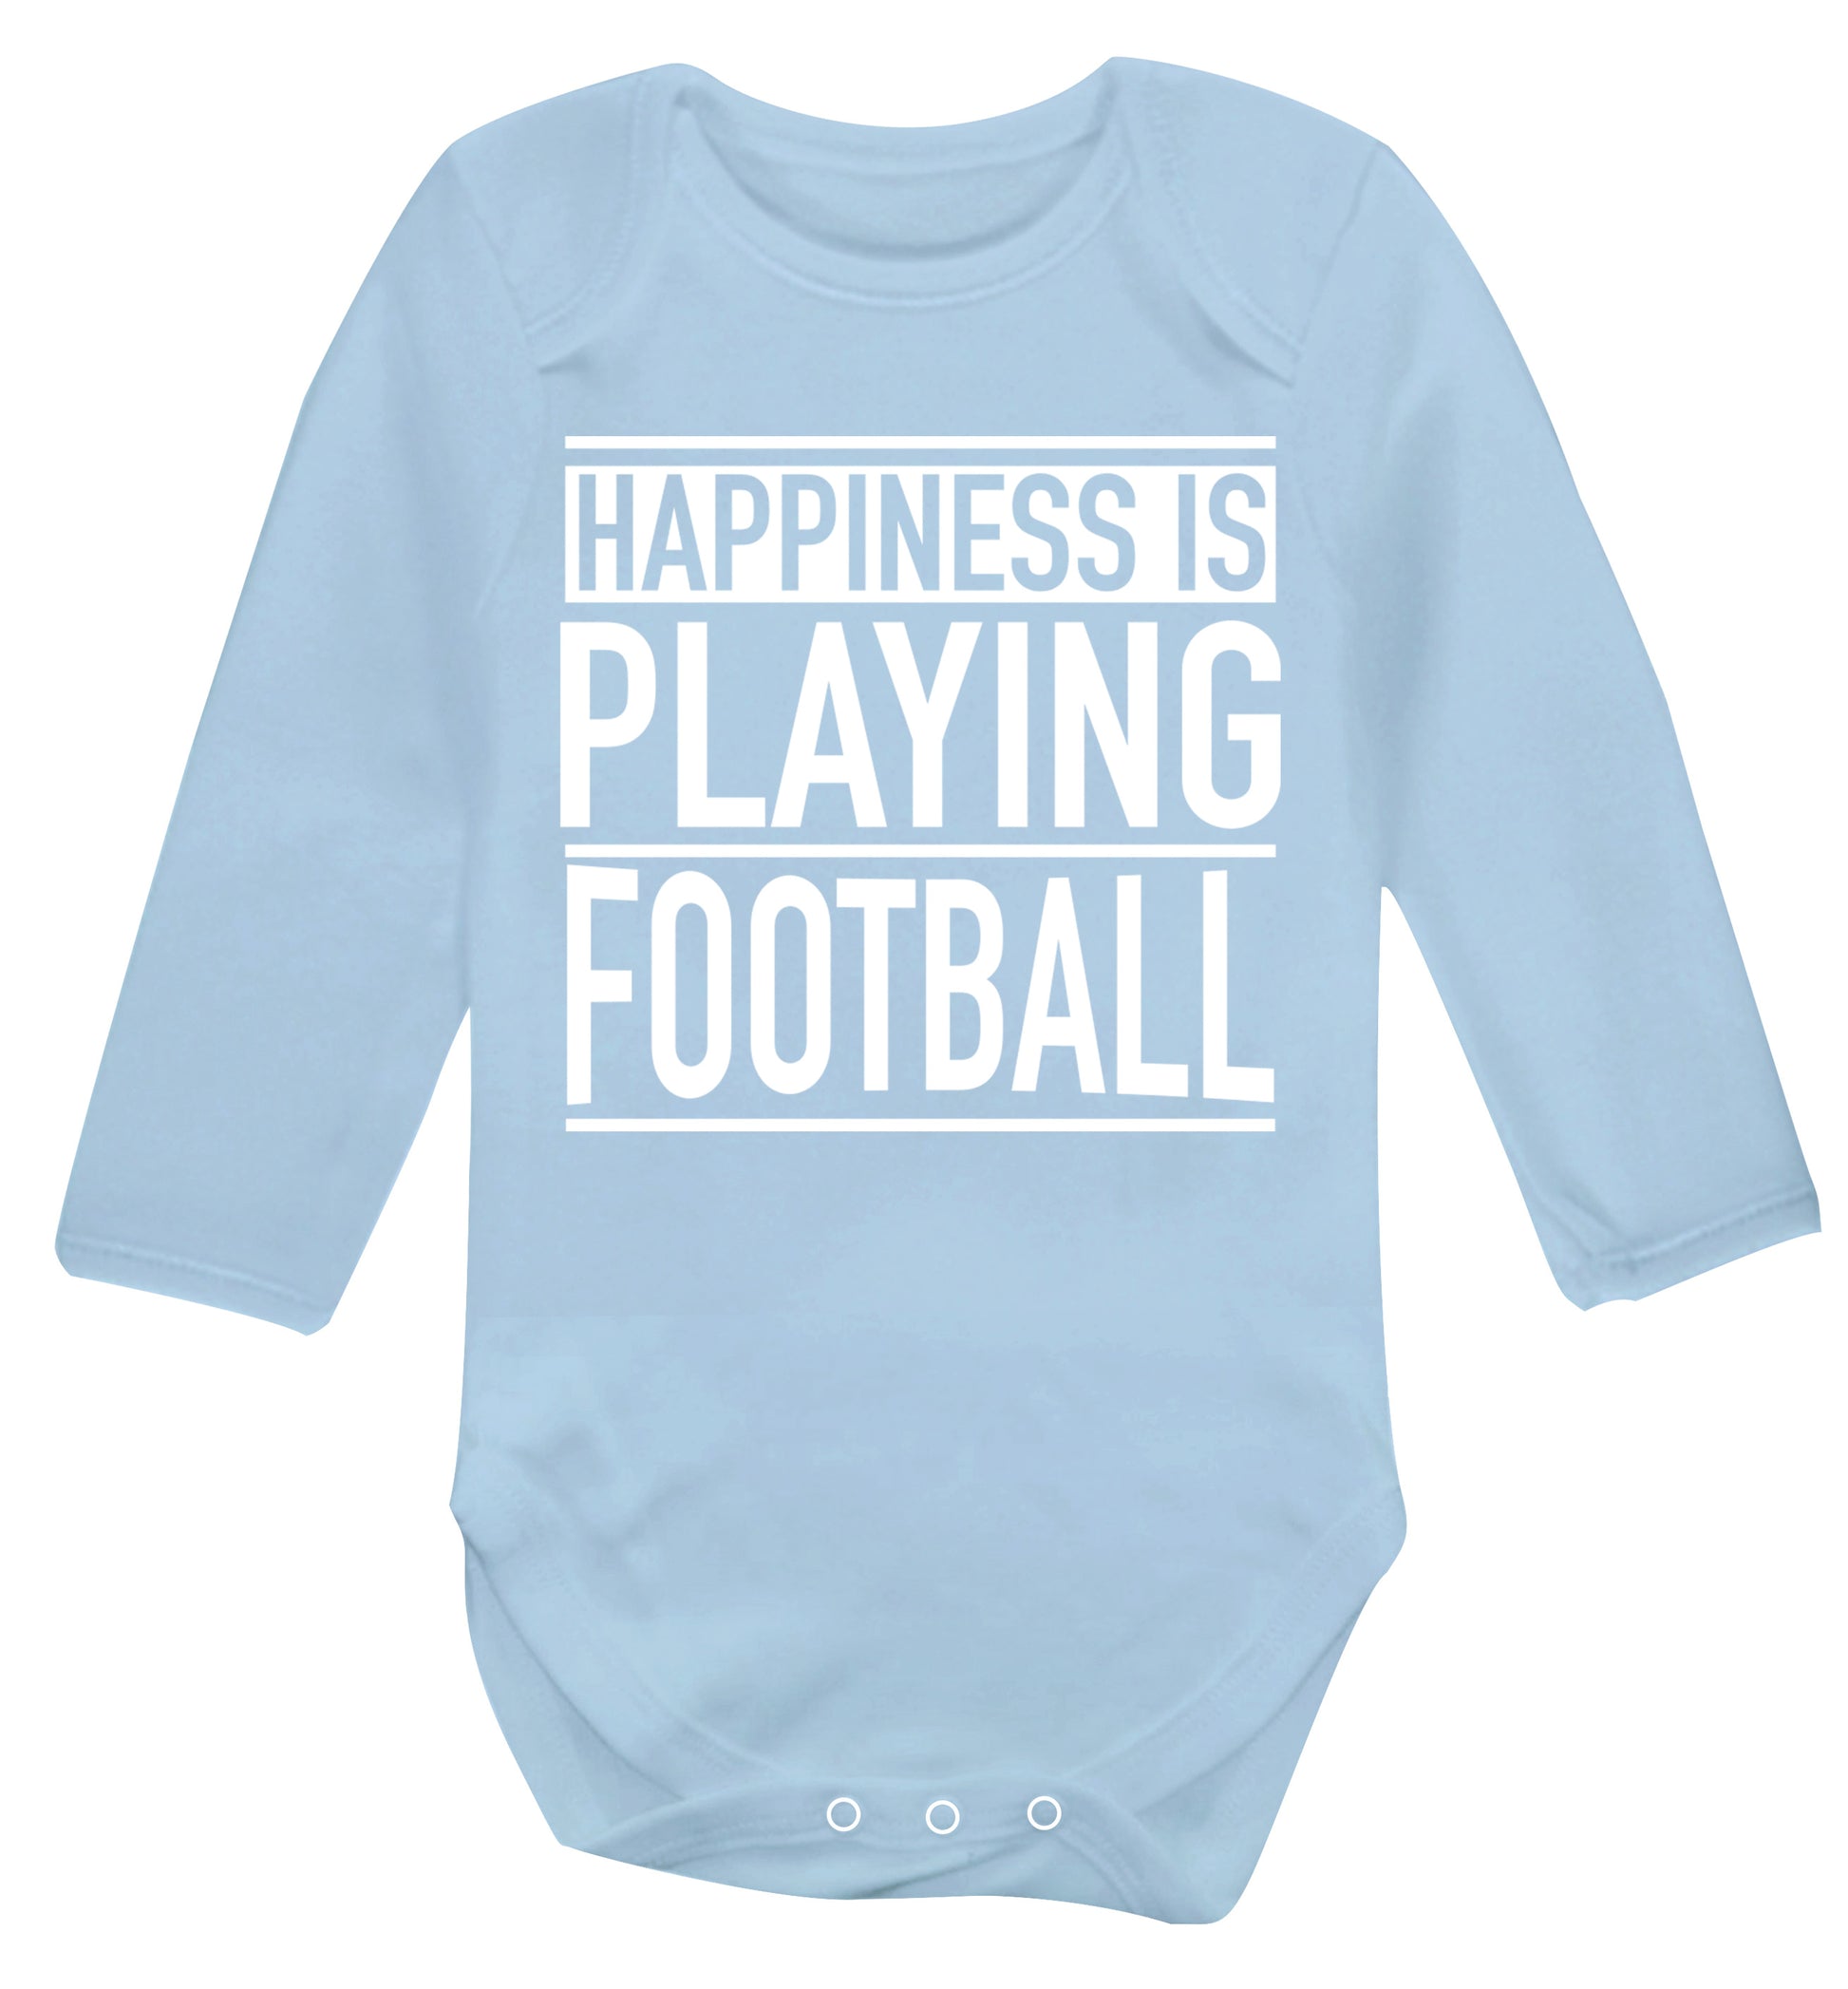 Happiness is playing football Baby Vest long sleeved pale blue 6-12 months